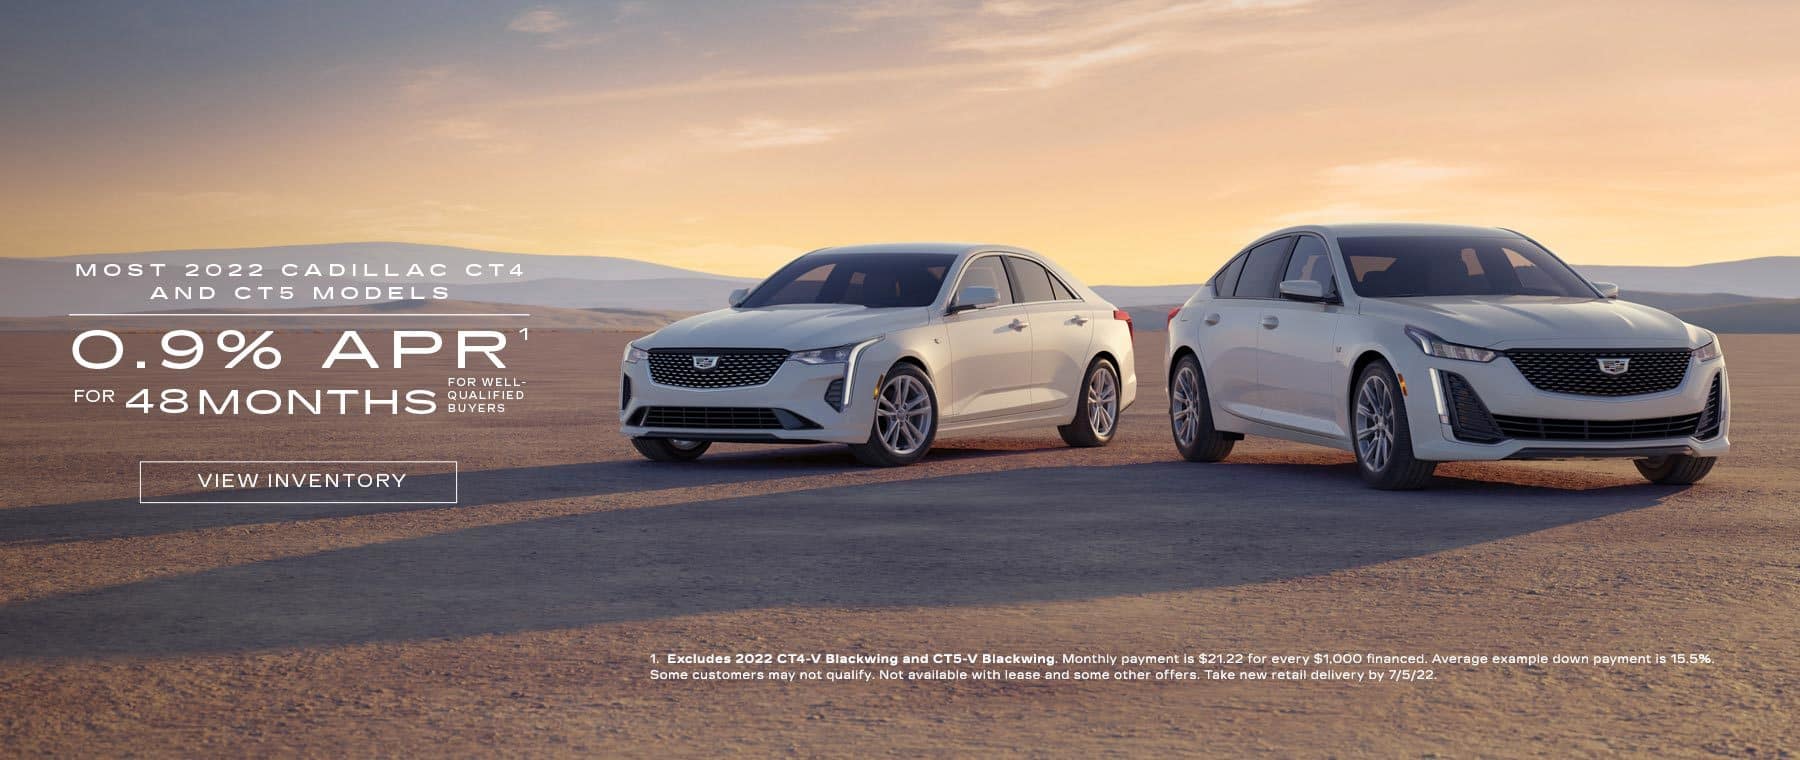 2022 Cadillac CT4 and CT5. 0.9% for 48 months for well-qualified buyers.